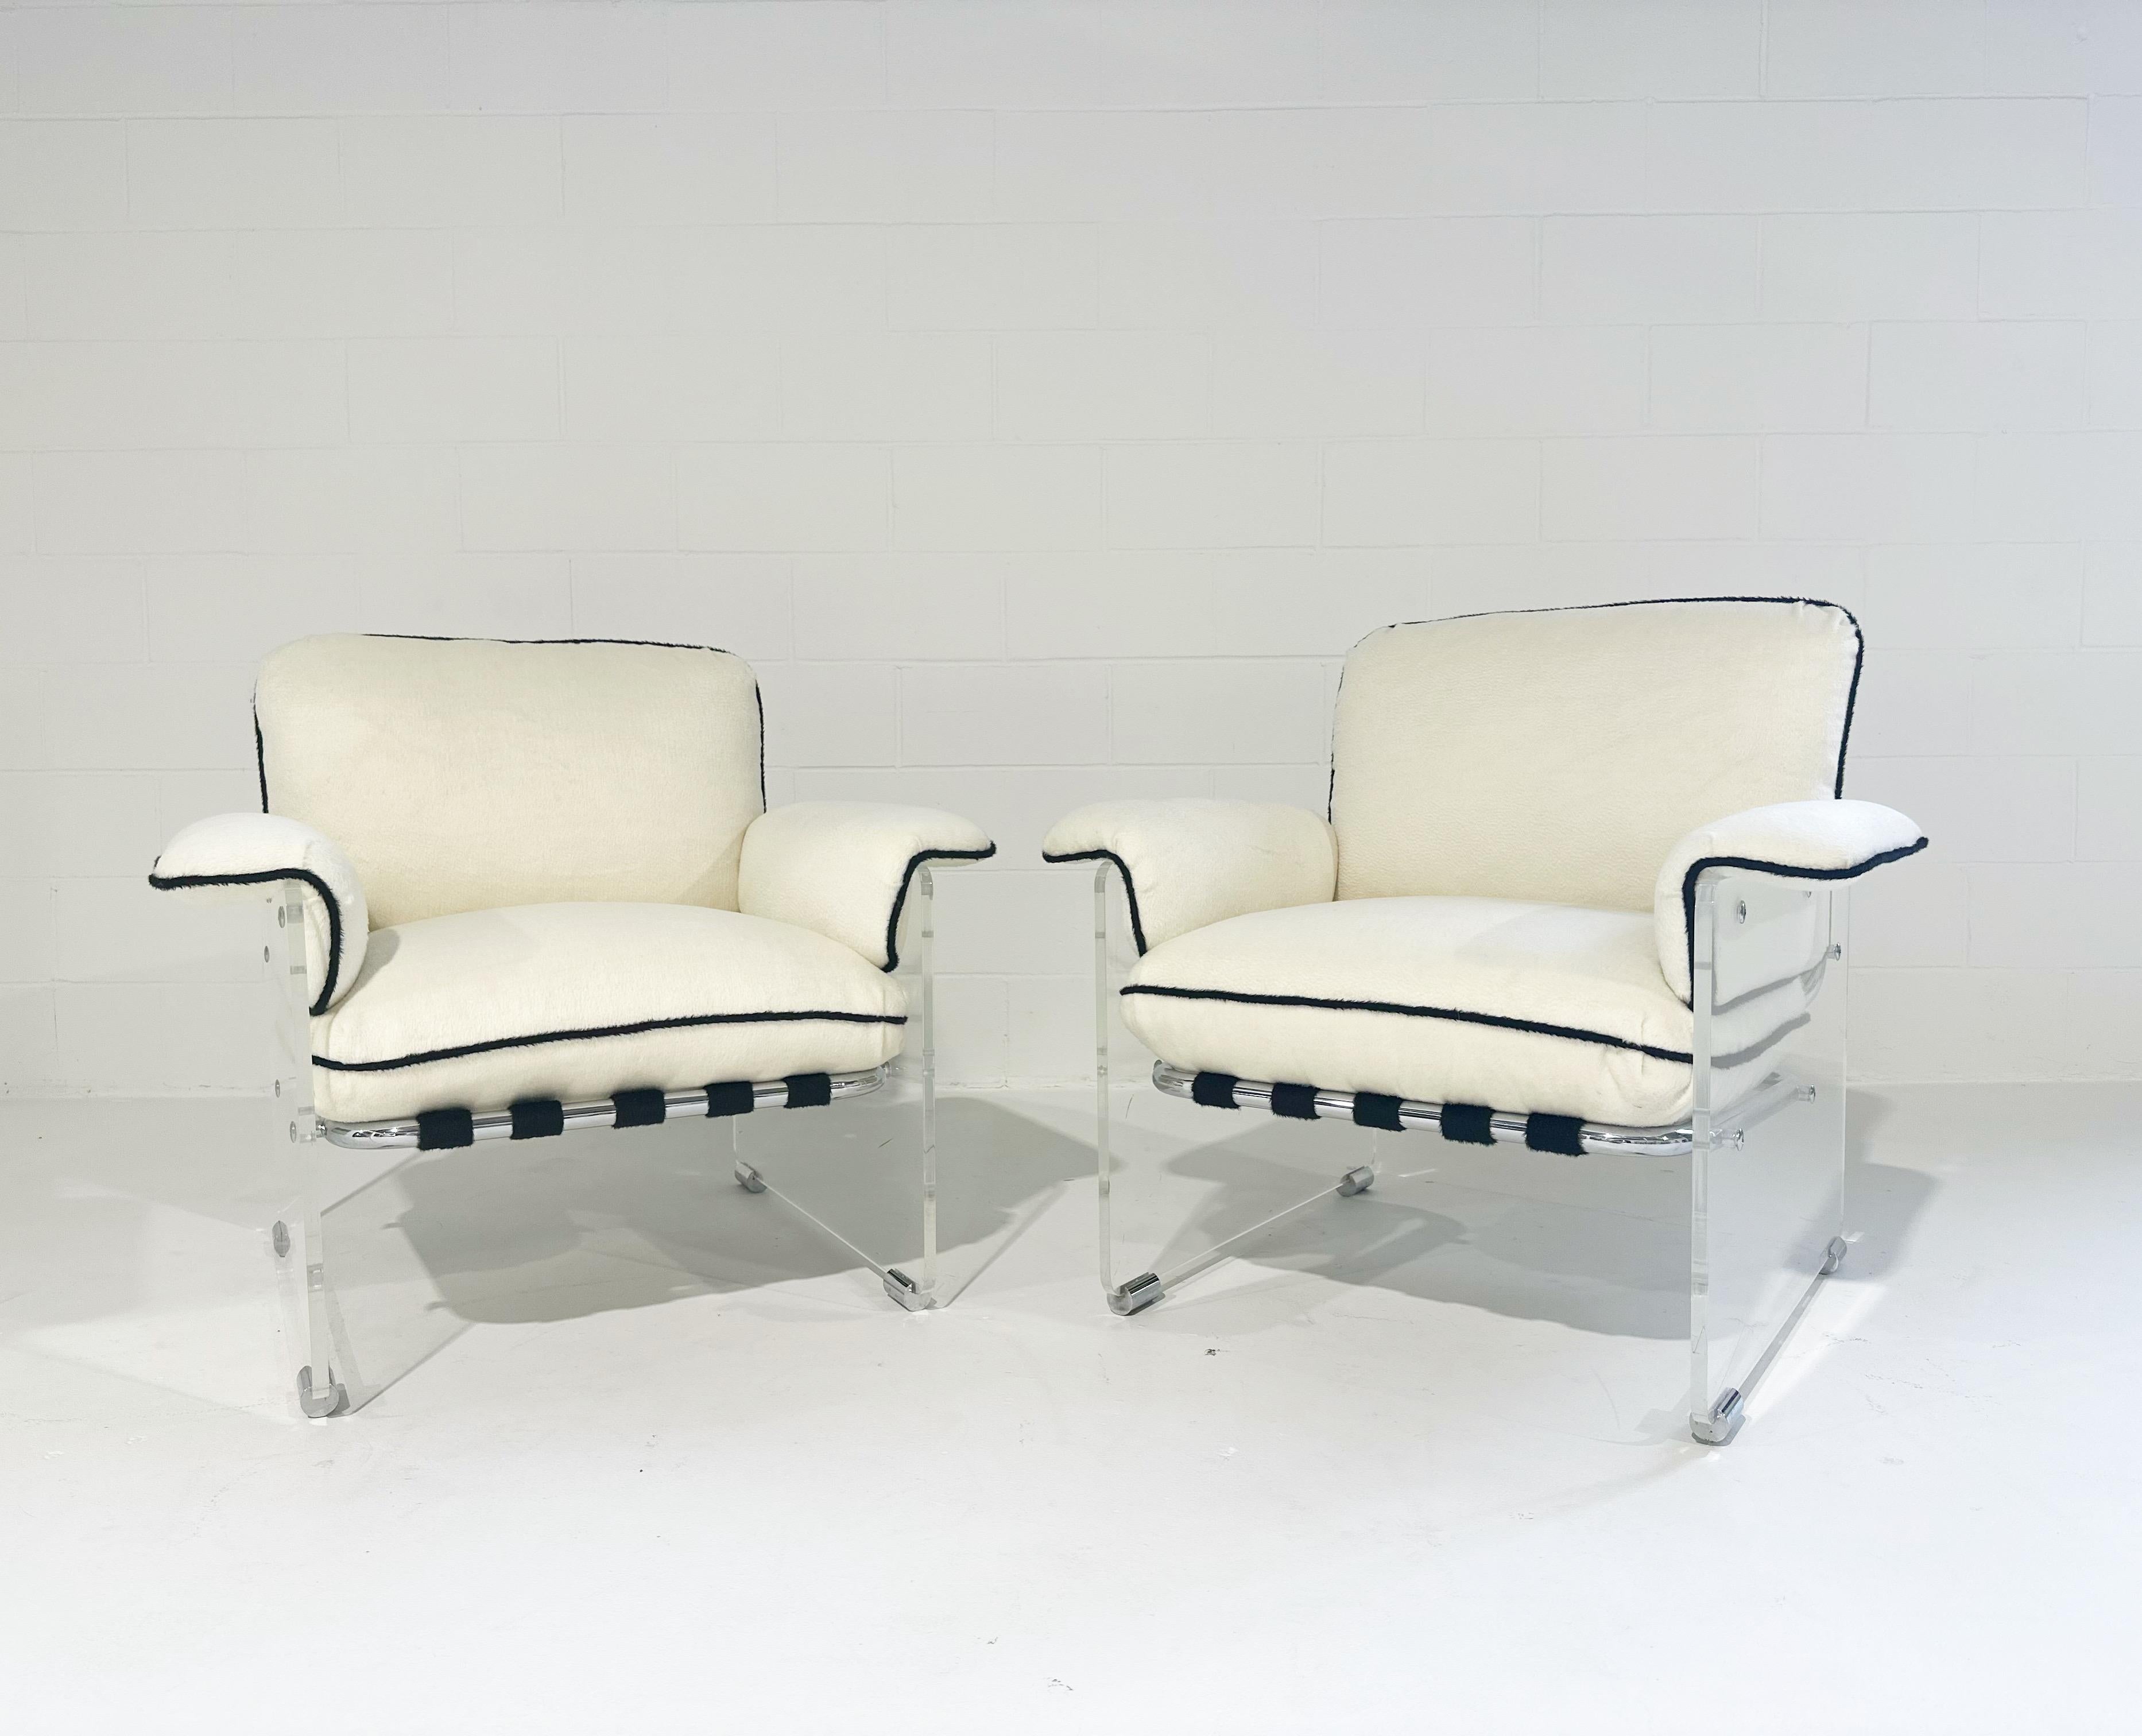 These amazing 1970s Pace Collection lounge chairs feature thick lucite panels with chrome details. Straps wrap the tubular chrome frame to support the cushions. The loose cushions and straps have all been masterfully created and upholstered in a